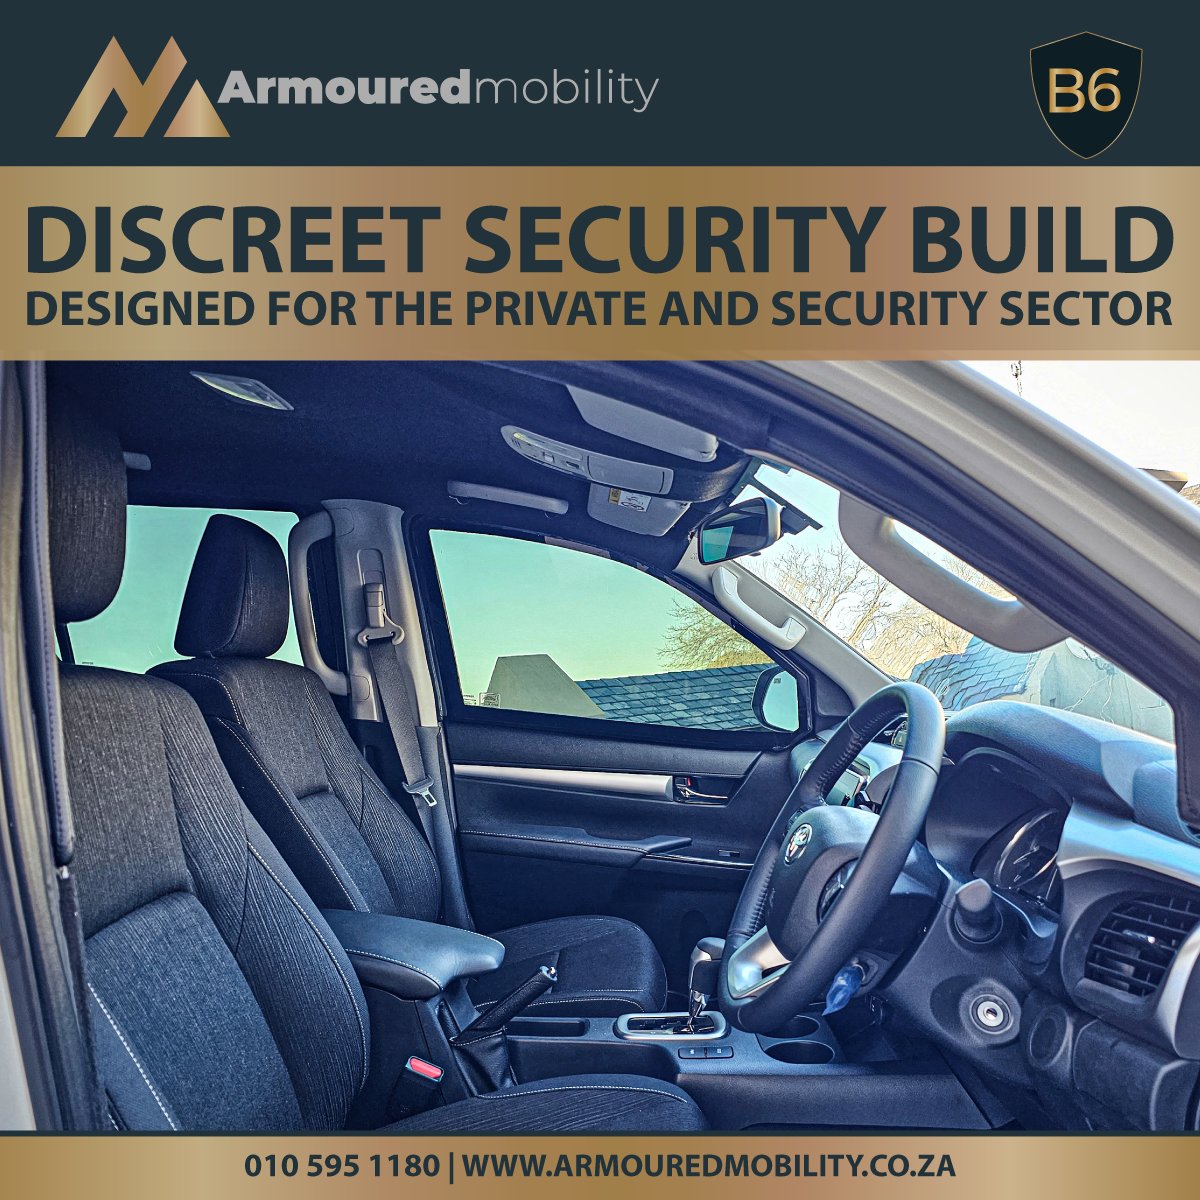 This is the interior of a B6 Armoured Toyota Hilux. Built in our factory, ready to go to market. 

For more information: armouredmobility.co.za/vehicles/toyot…

#armouredmobility #securityarmour #b6armour #bulletproof #discreetsecuritybuild